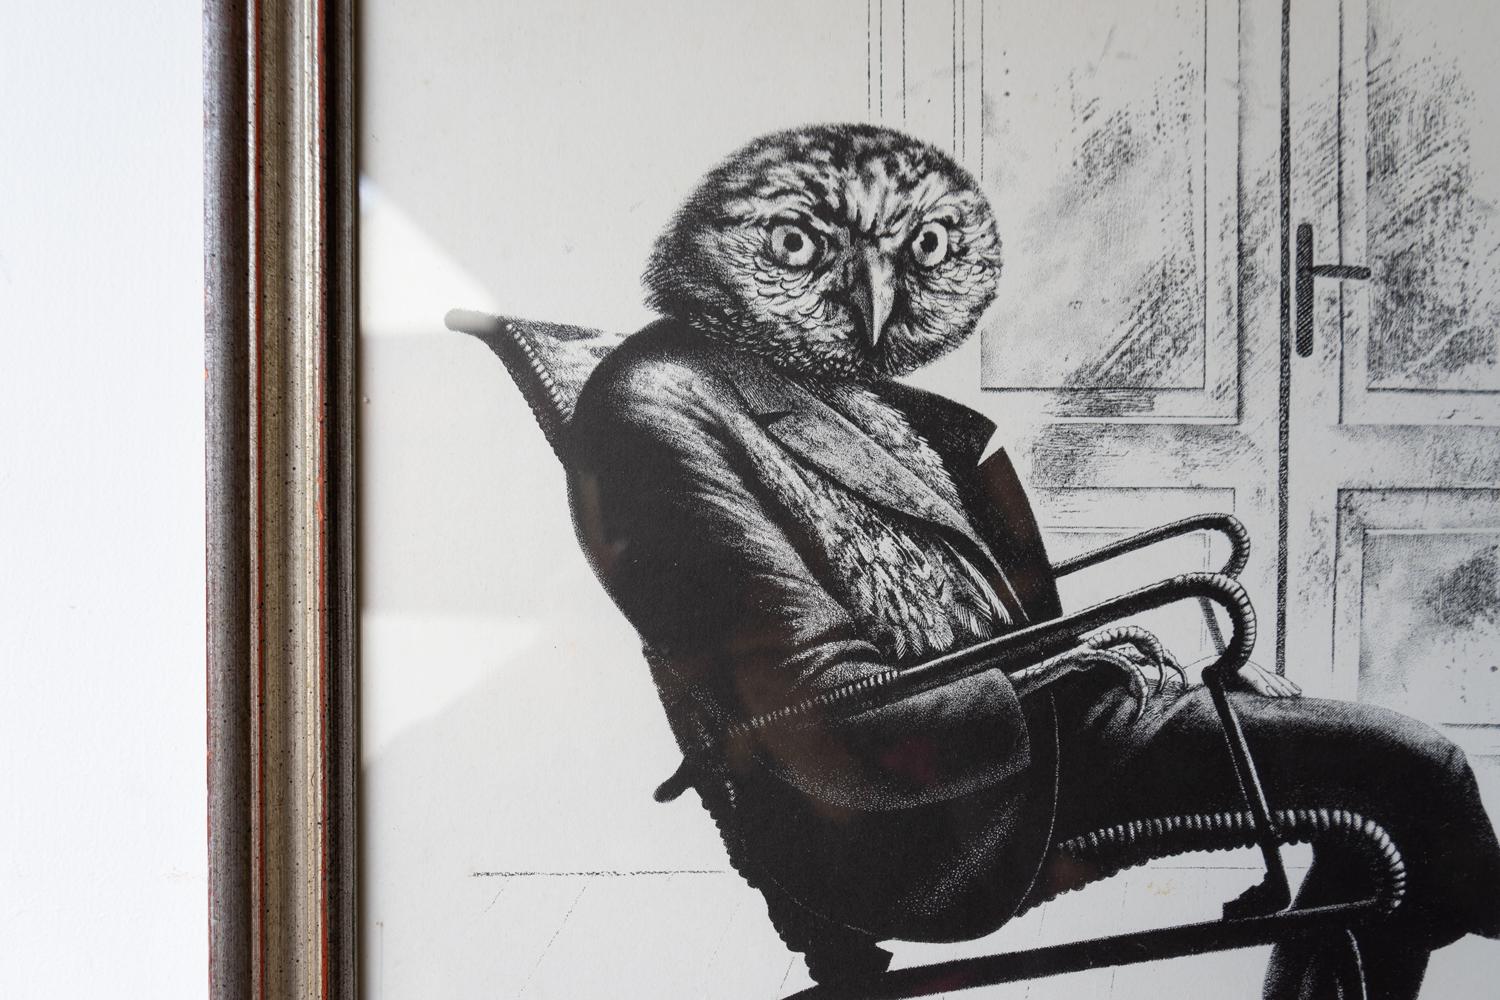 Vintage Monochrome Anthropomorphic Owl Print By John Roberts, Mid 20th Century In Good Condition For Sale In Bristol, GB